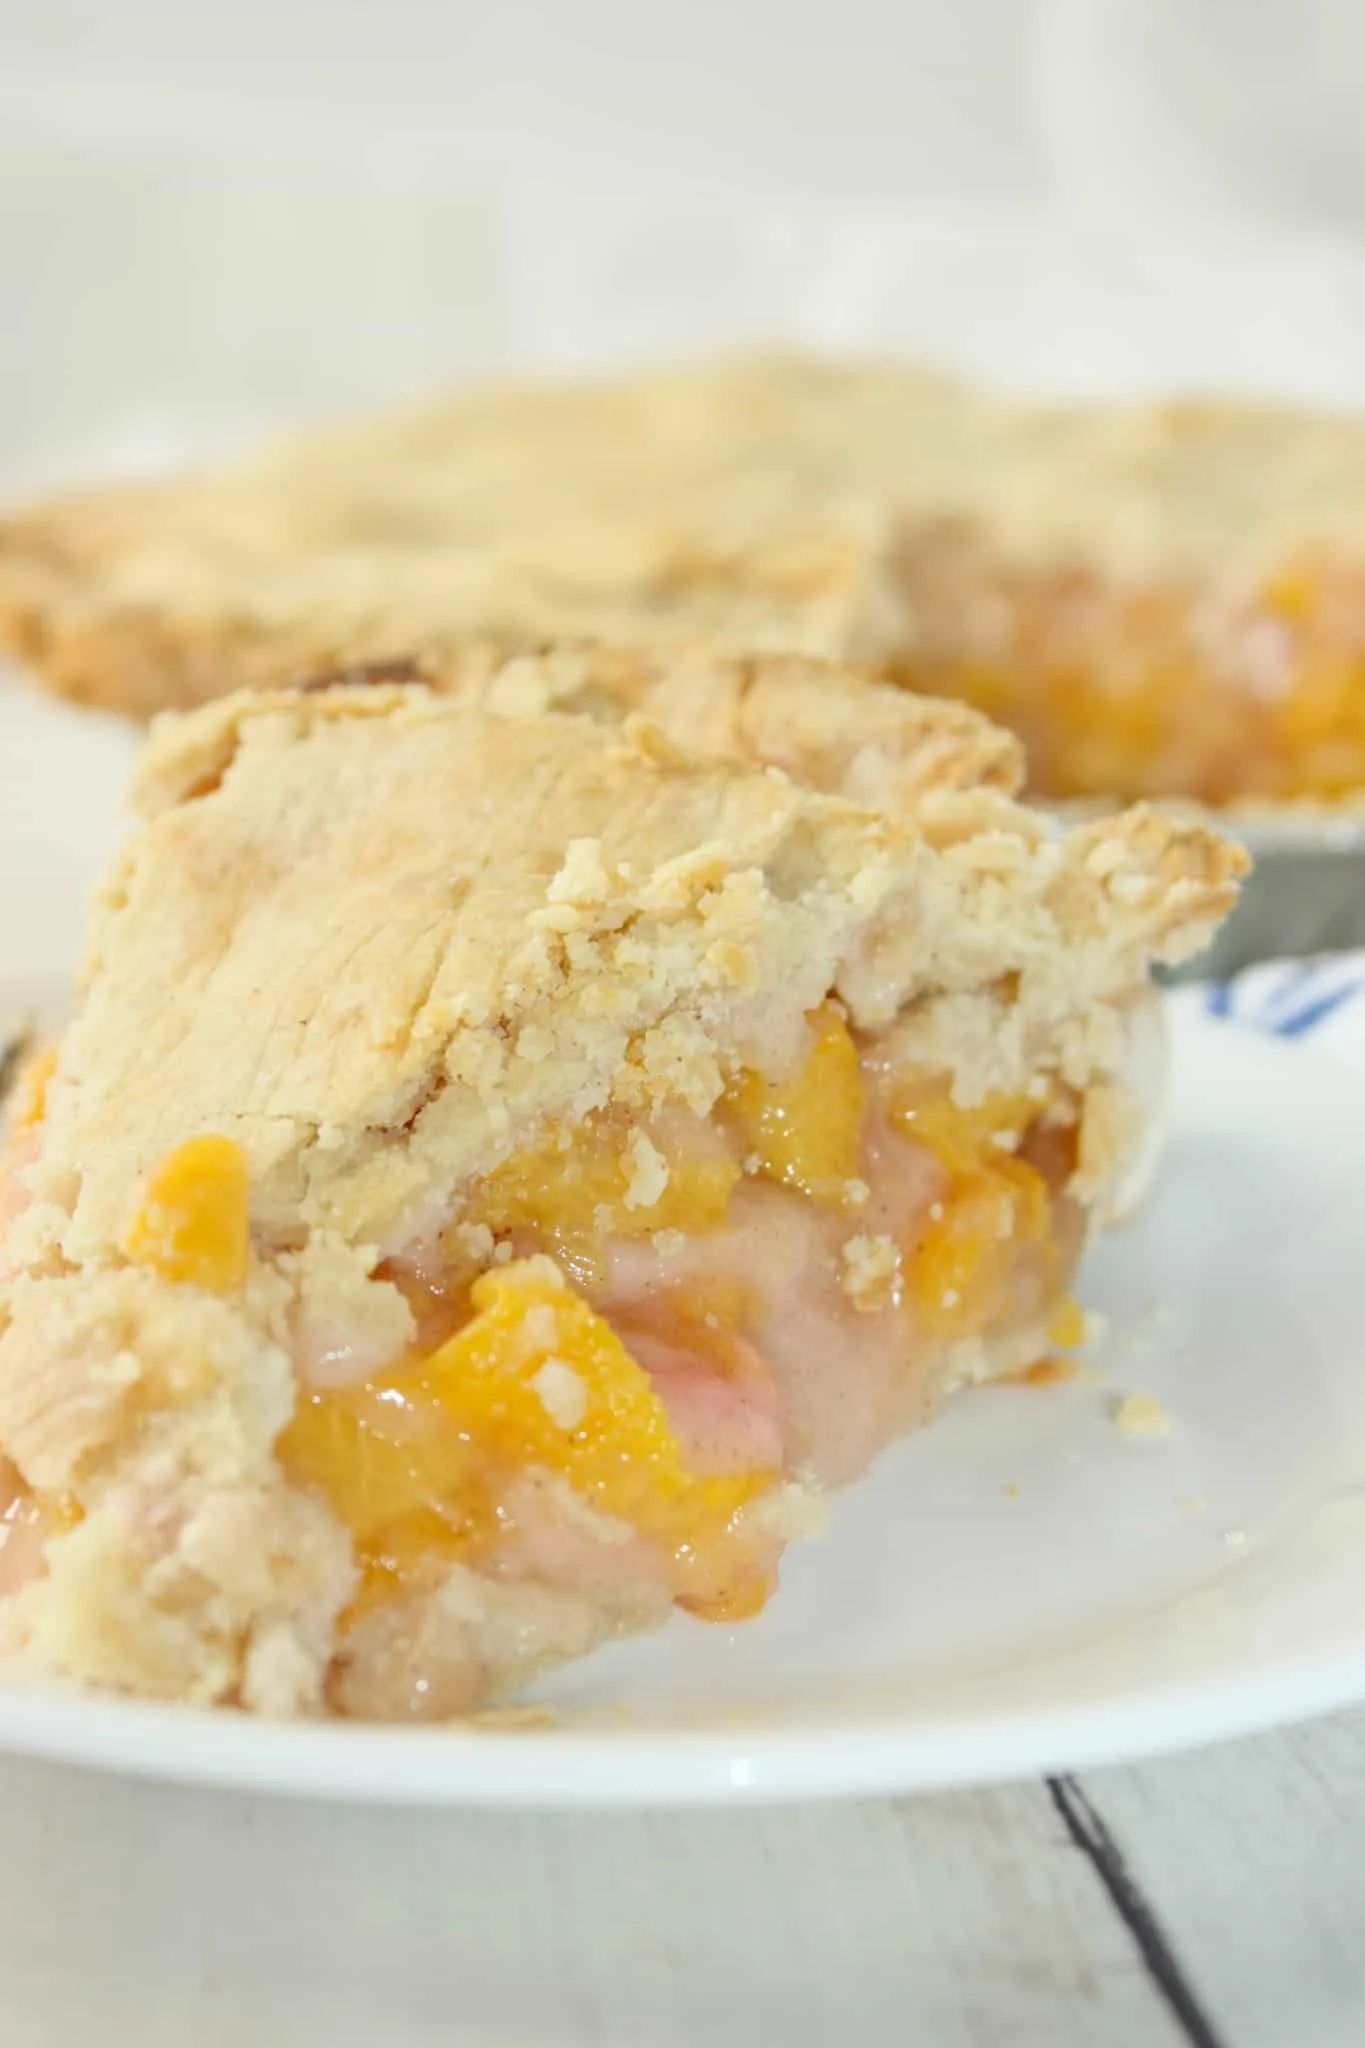 As summer progresses we enjoy the arrival of another seasonal fruit.  Peaches are a tasty treat on their own but are delectable when served up in a pie!